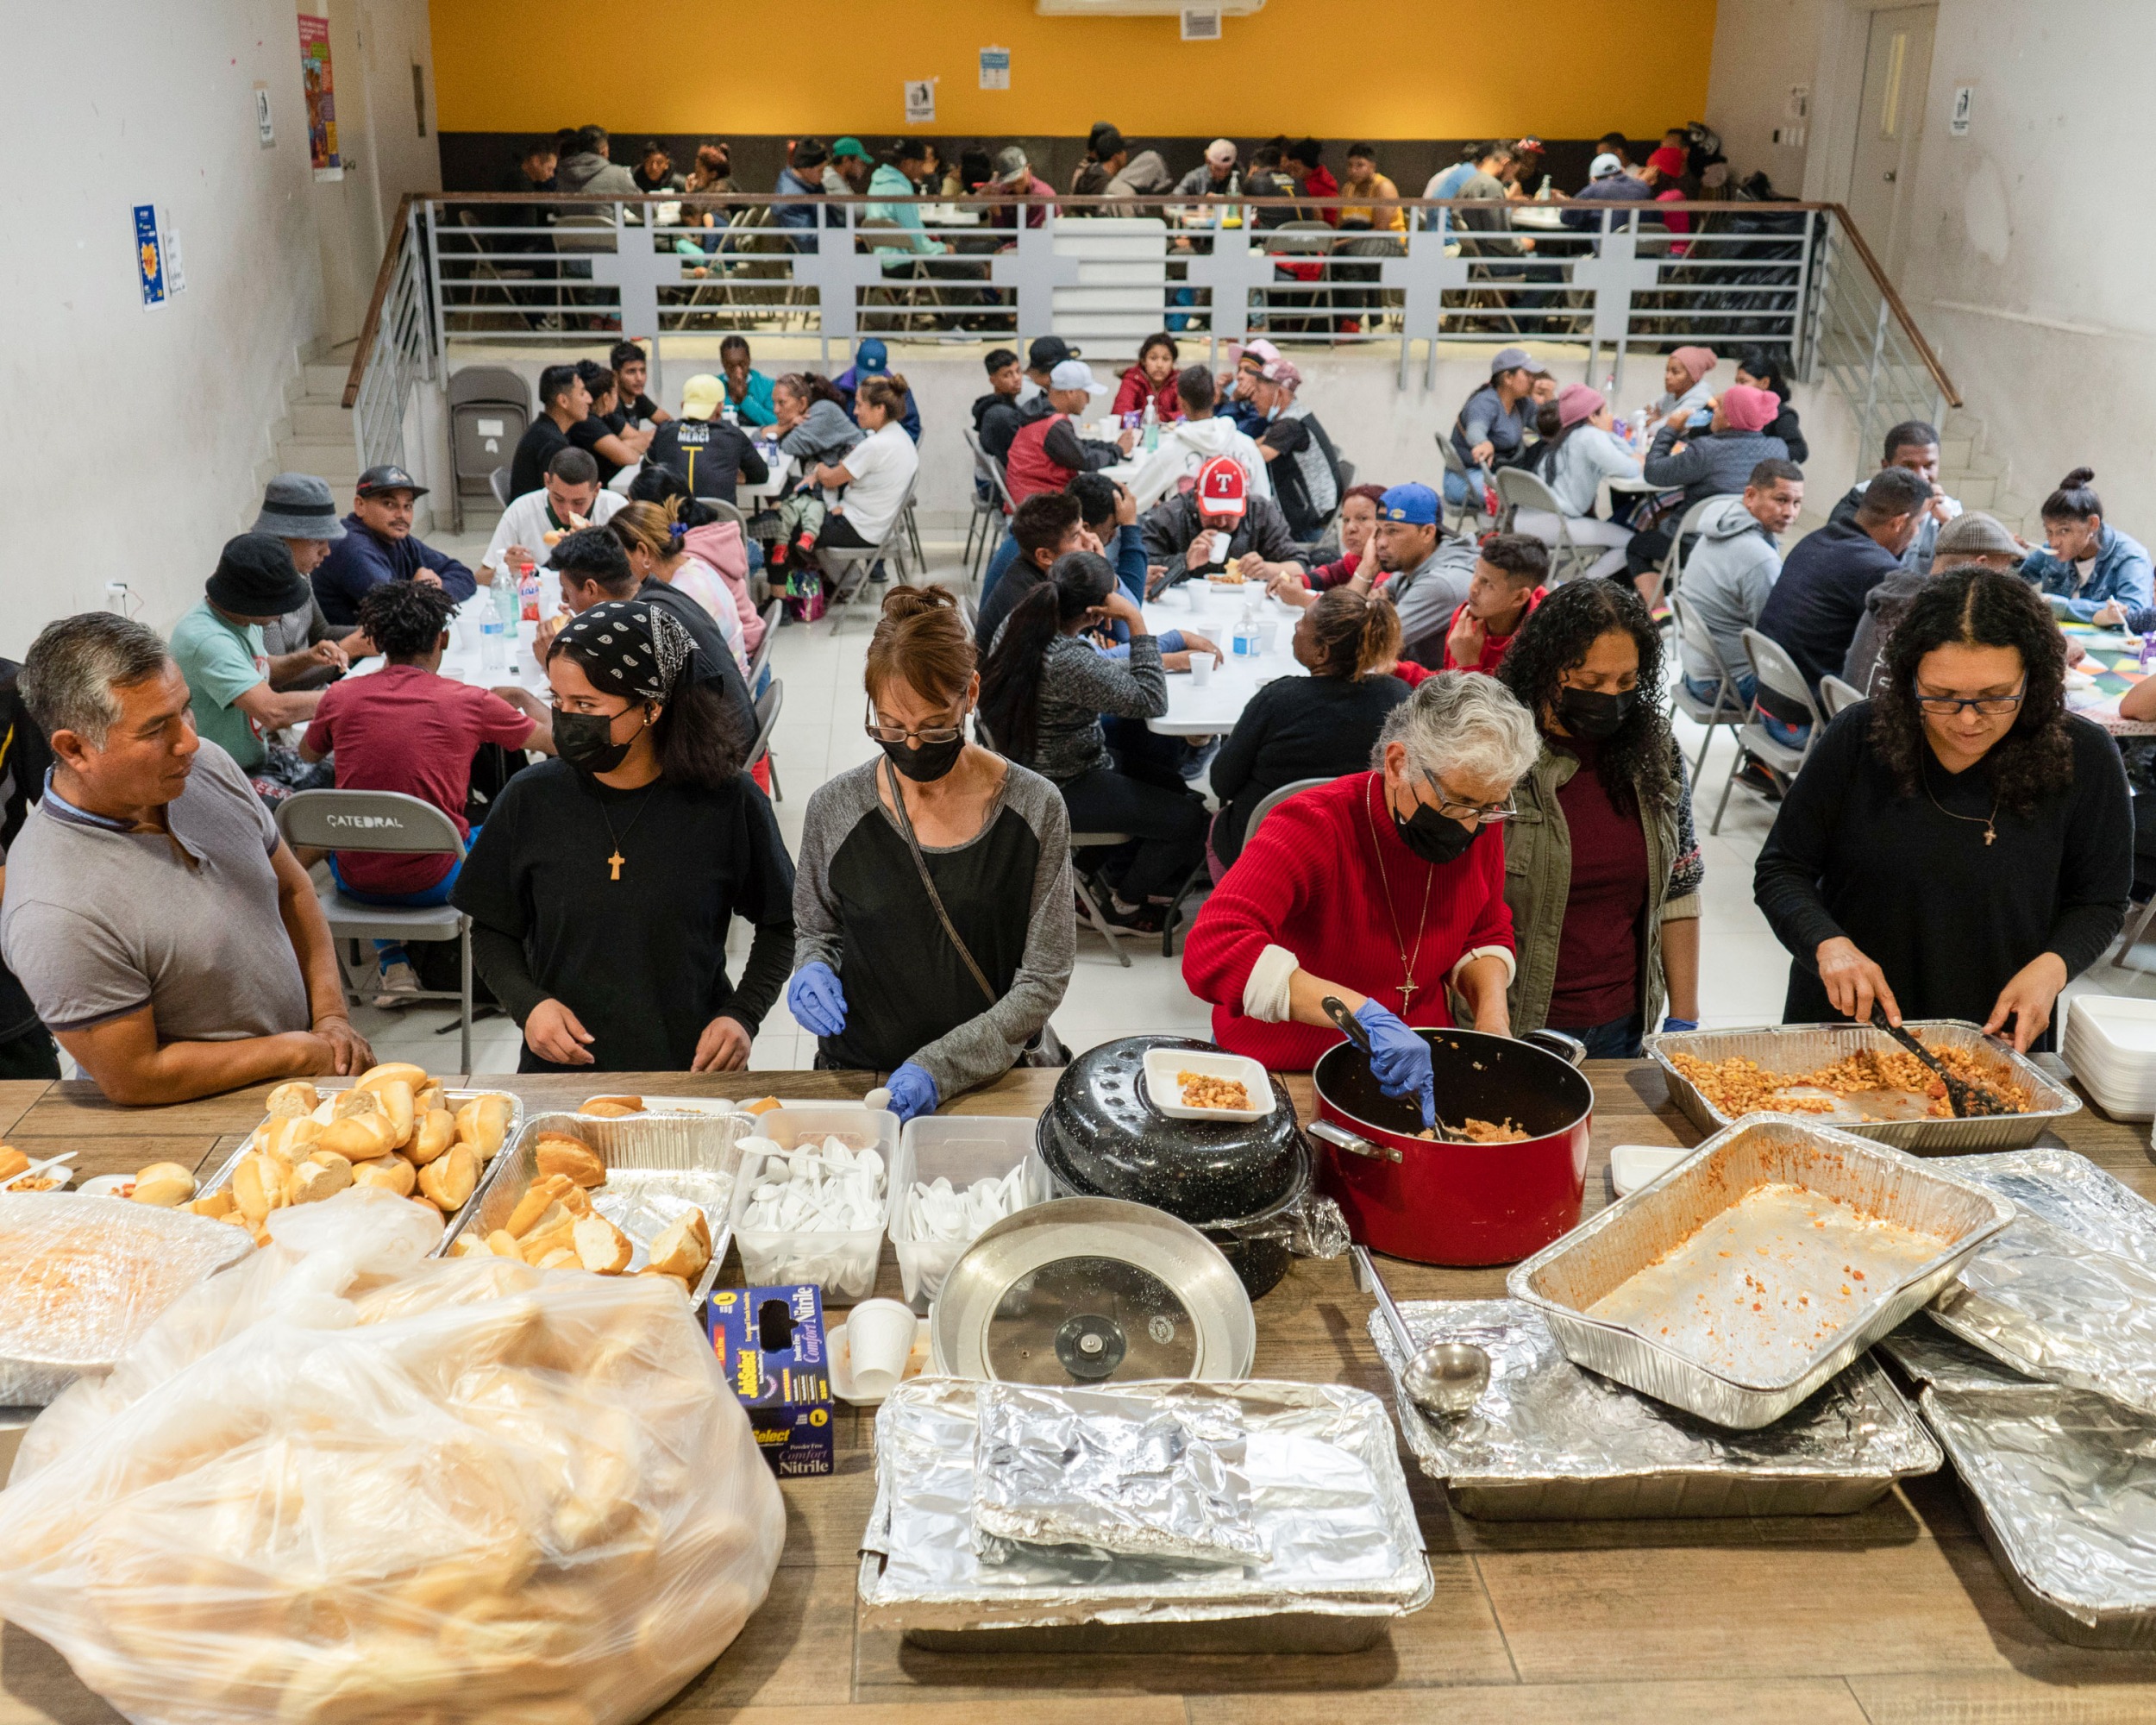 In the foreground people help themselves from aluminum trays of food while others can be seen sitting at tables eating in the background.